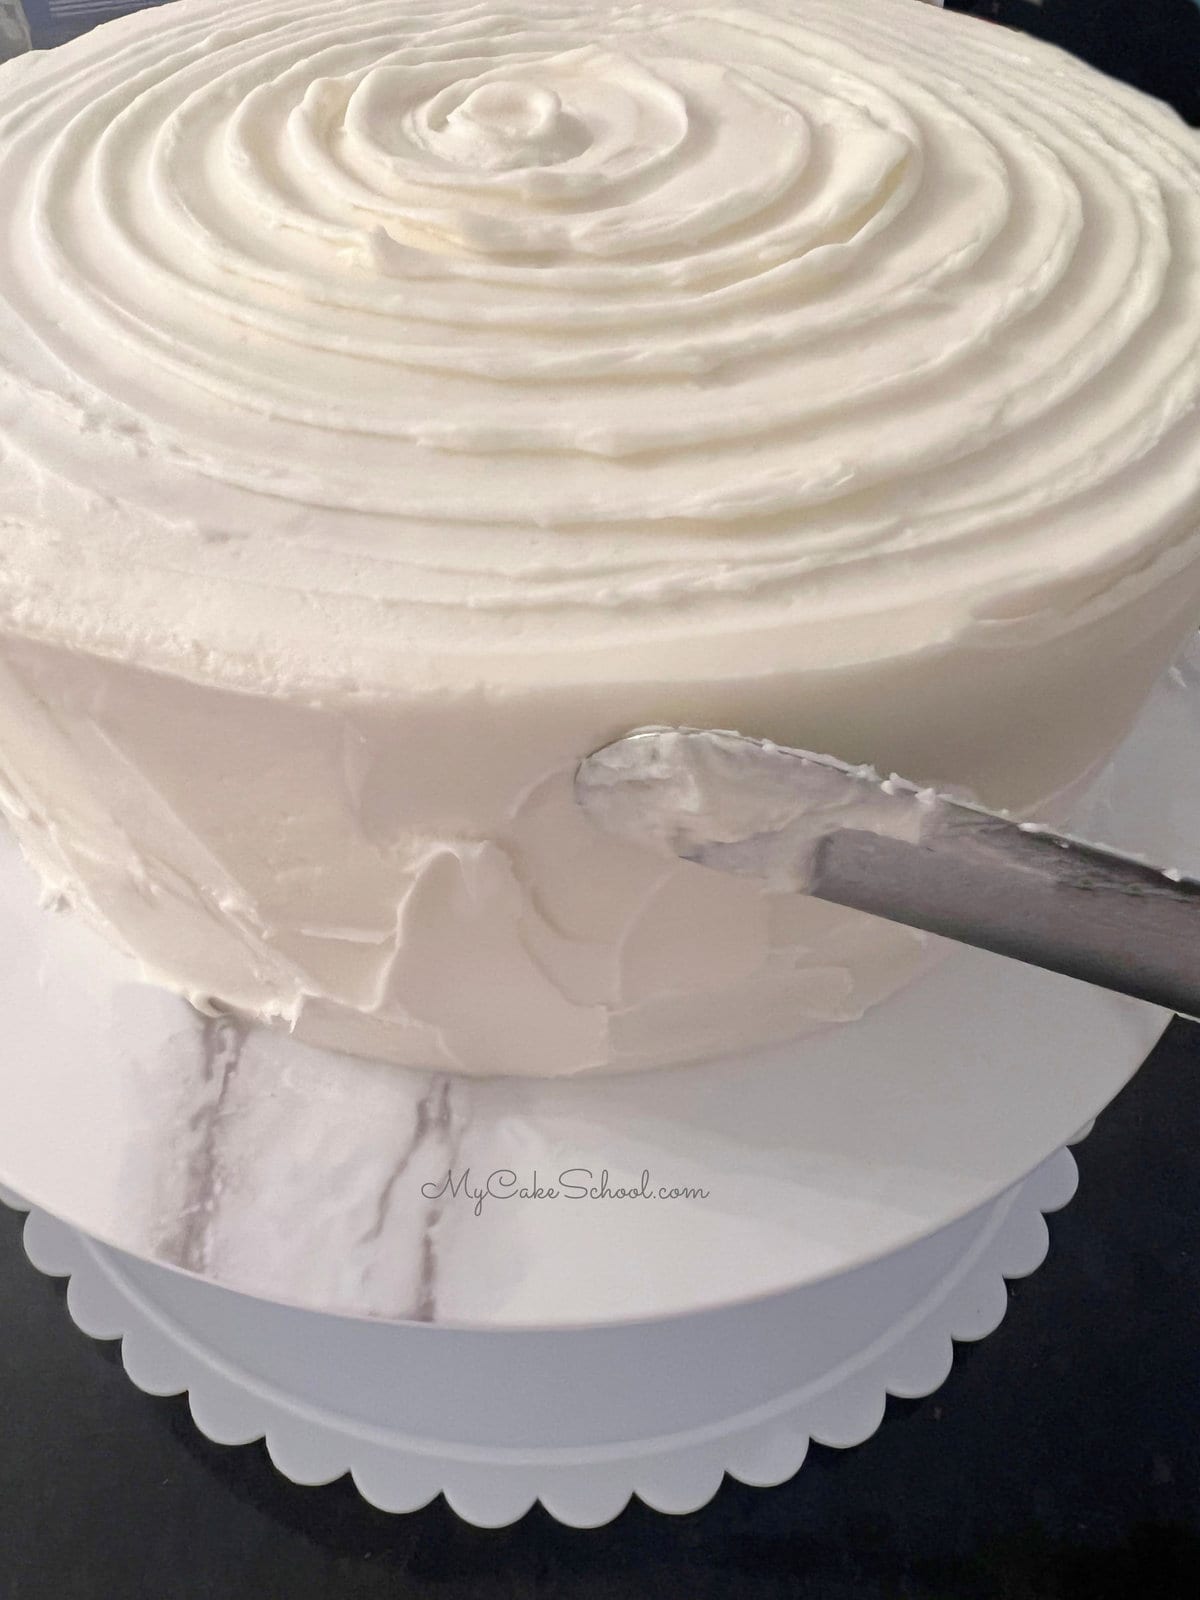 Adding texture to the cake frosting with an offset spatula